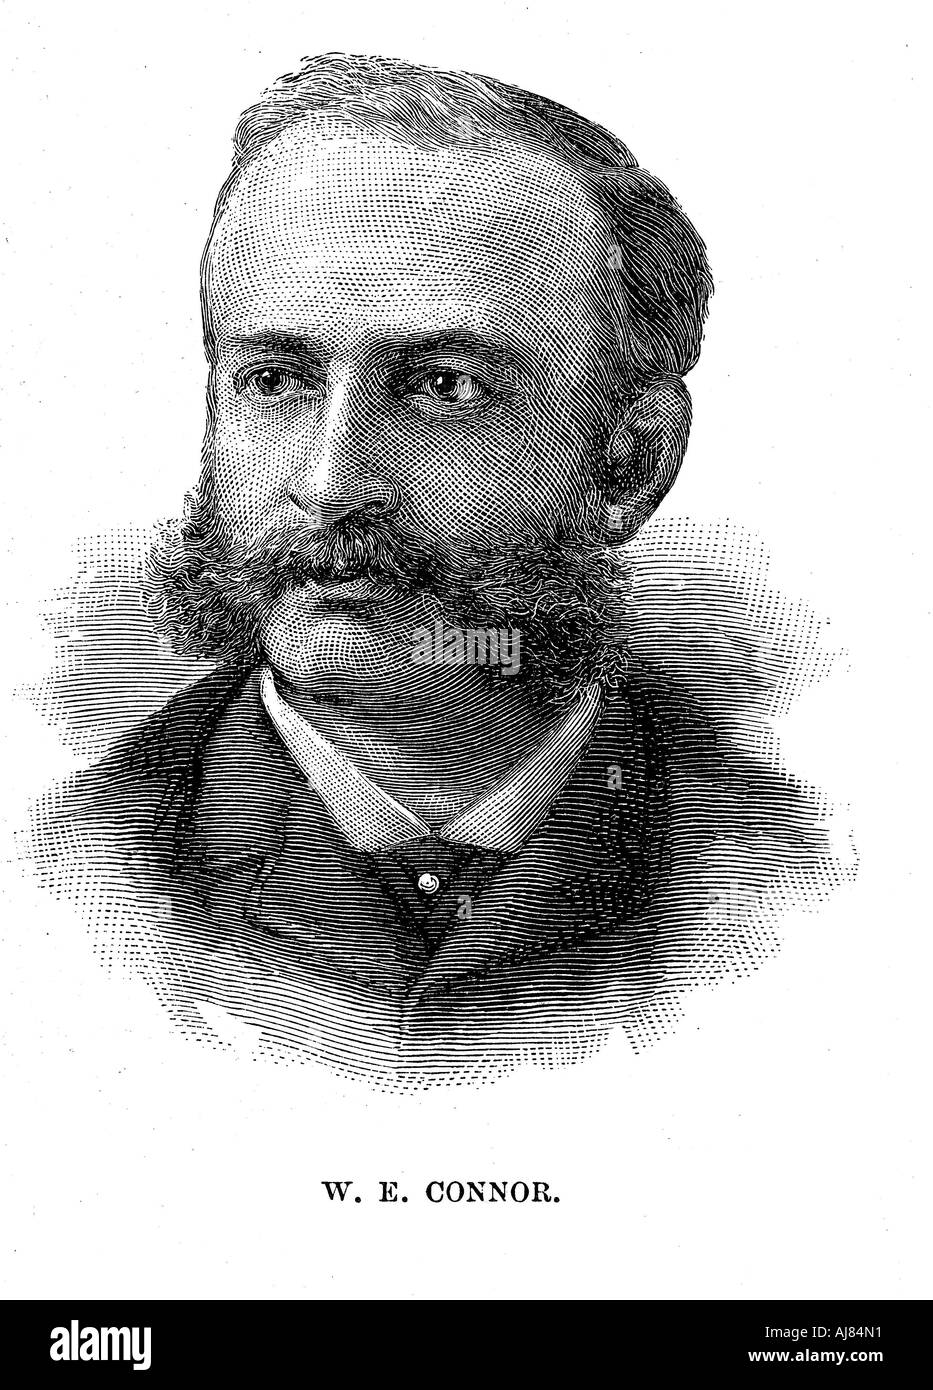 Washington E Connor, partner and broker of the Jay Gould stochbroking firm, 1885. Artist: Unknown Stock Photo